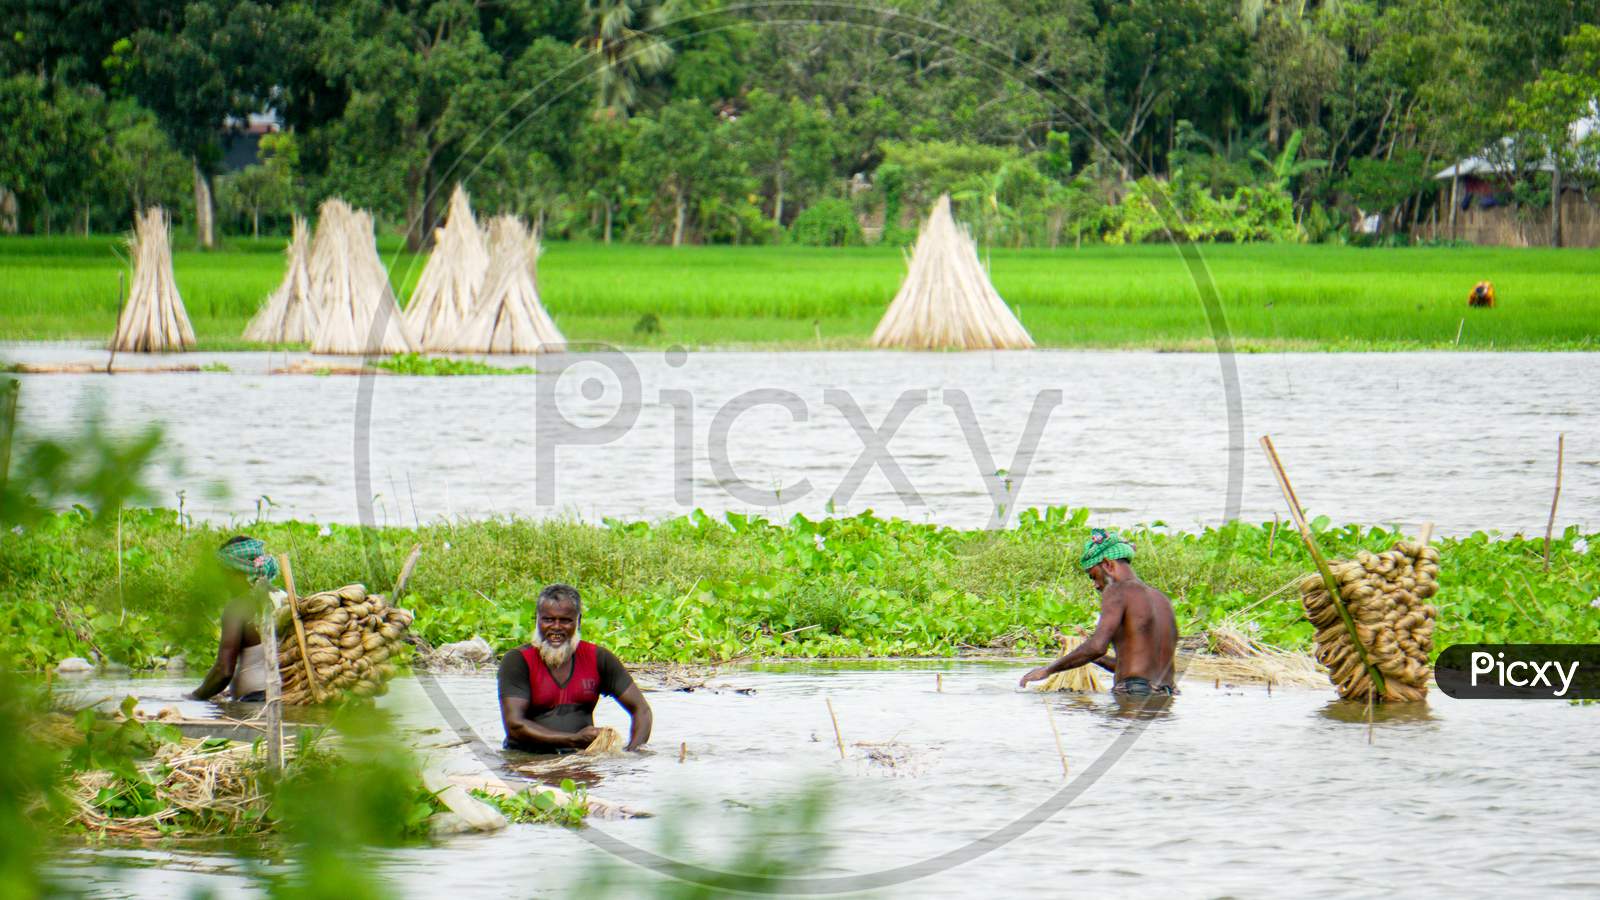 Farmers In Bangladesh Are Busy Washing Jute In Water. Jute Is Called Golden Fiber. Jute Is Widely Cultivated In India And Bangladesh.